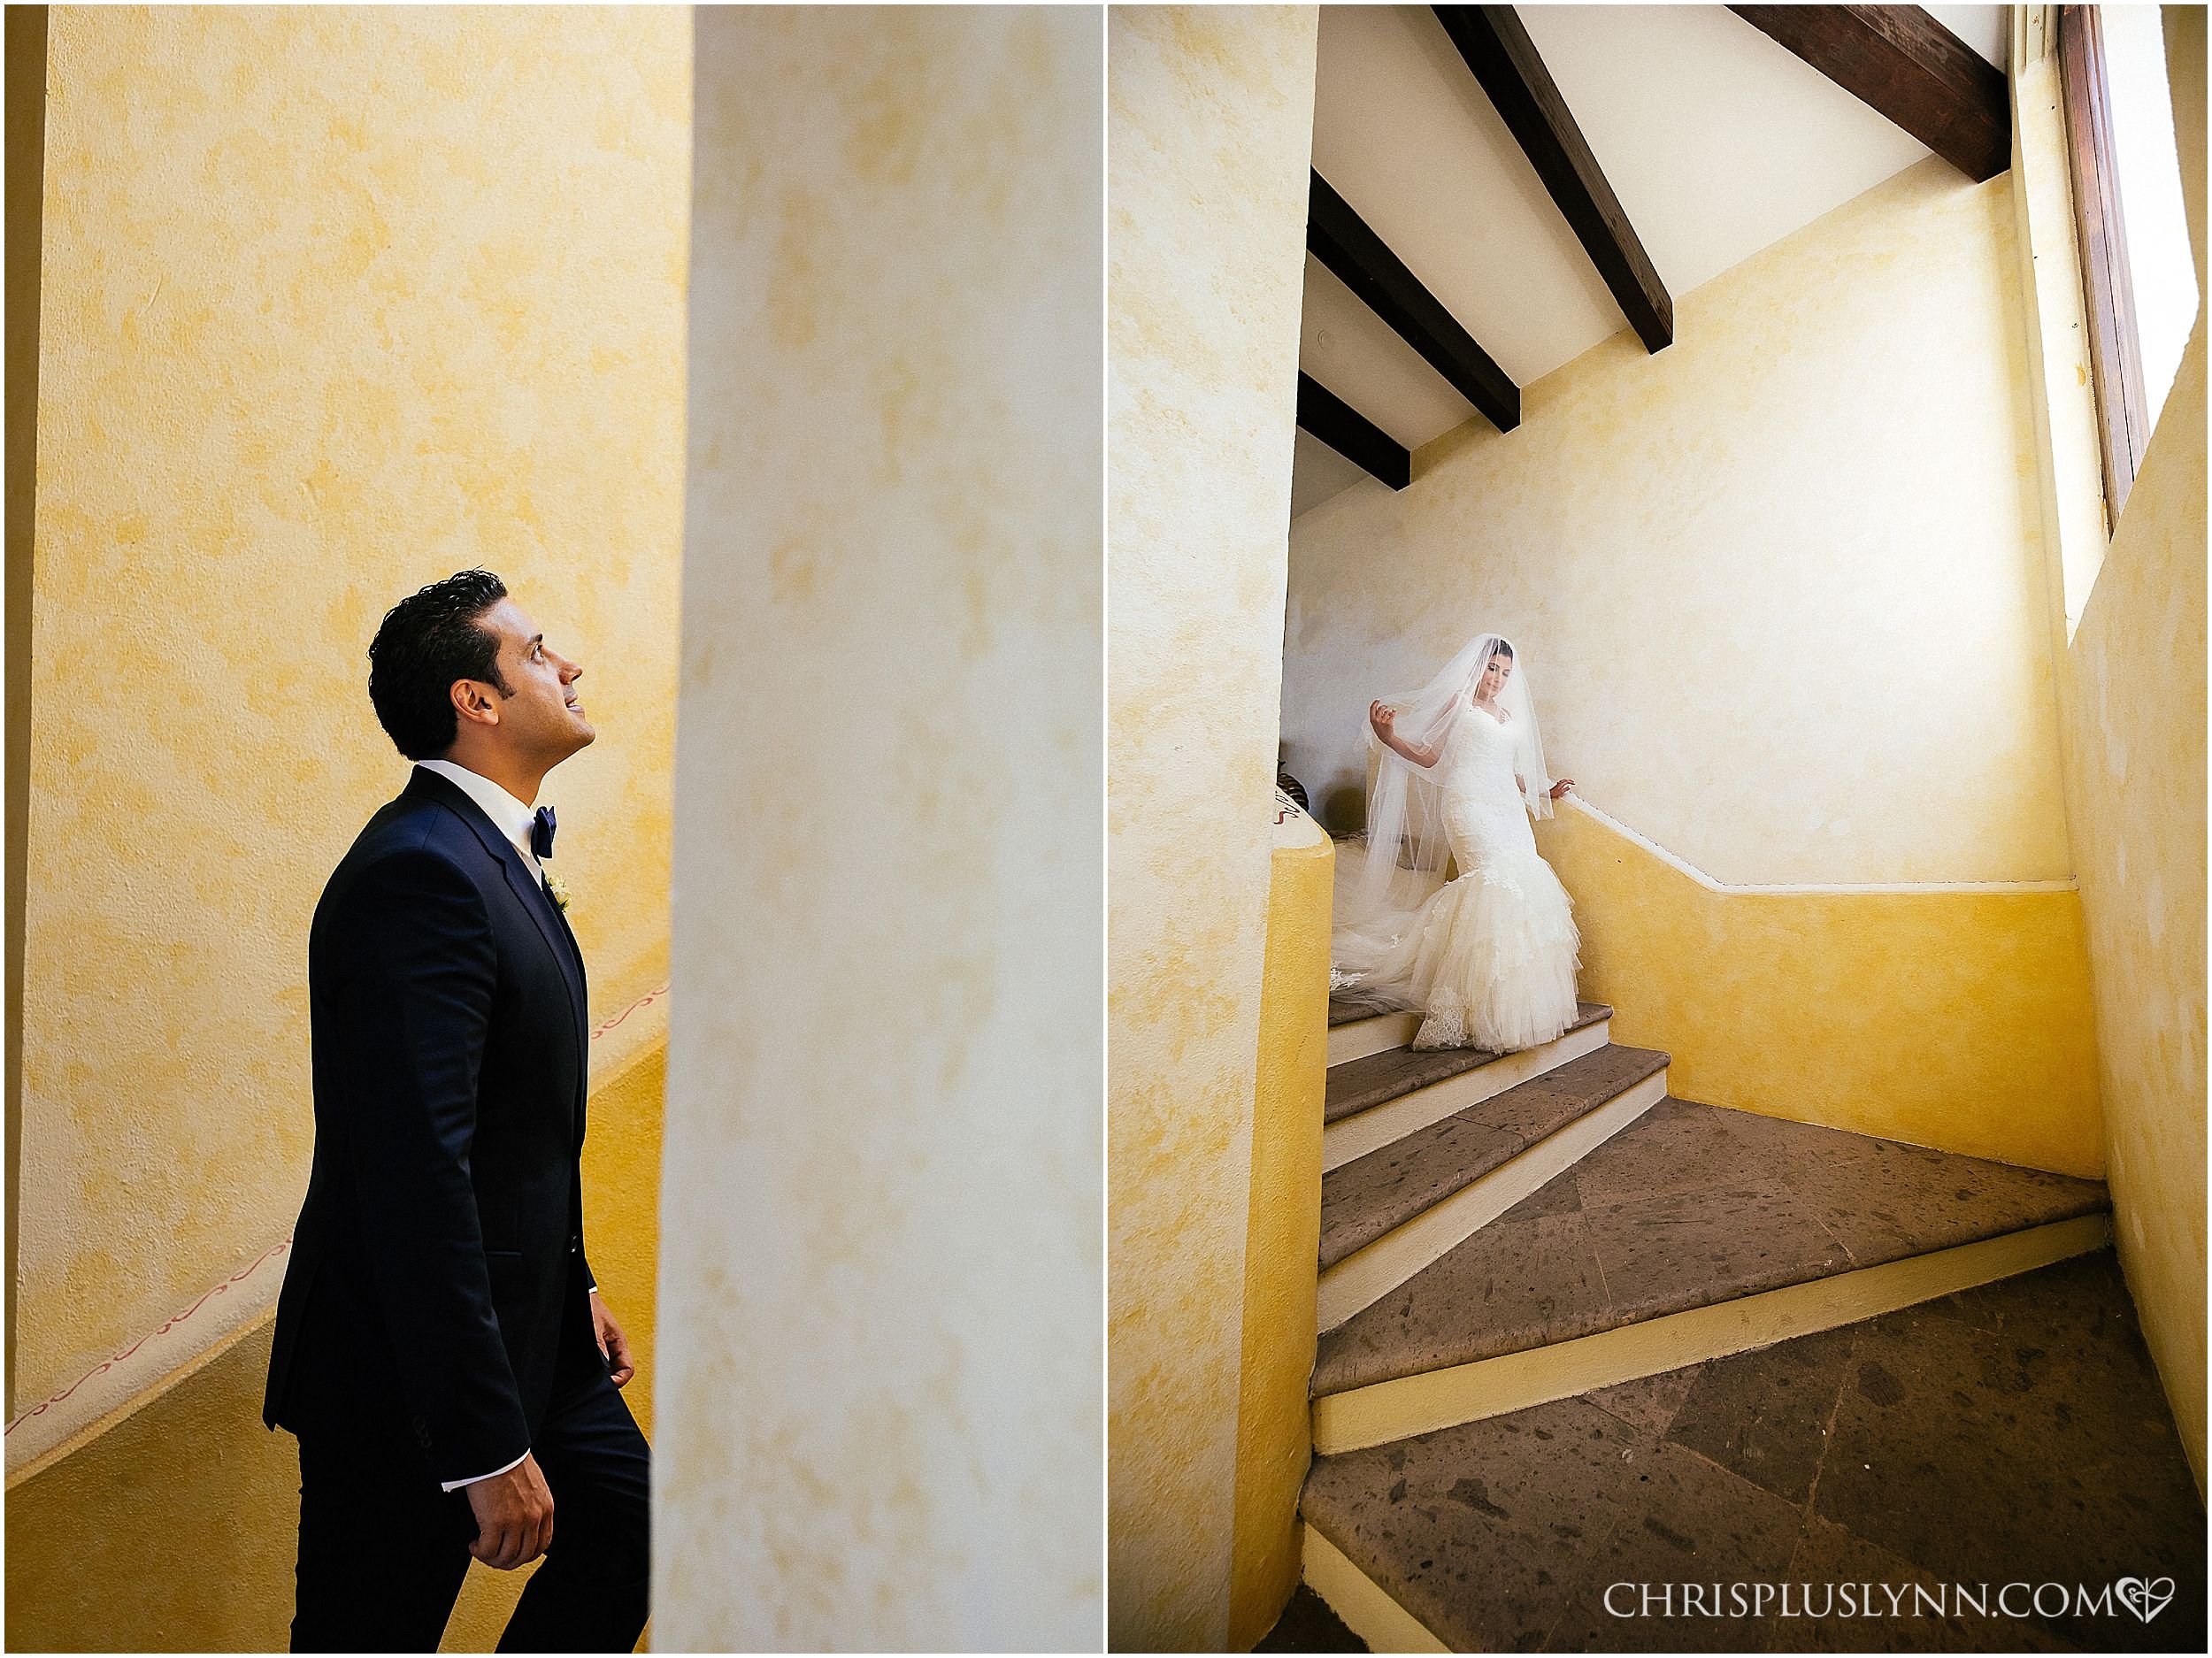 Cabo del Sol Wedding | First Look on Staircase